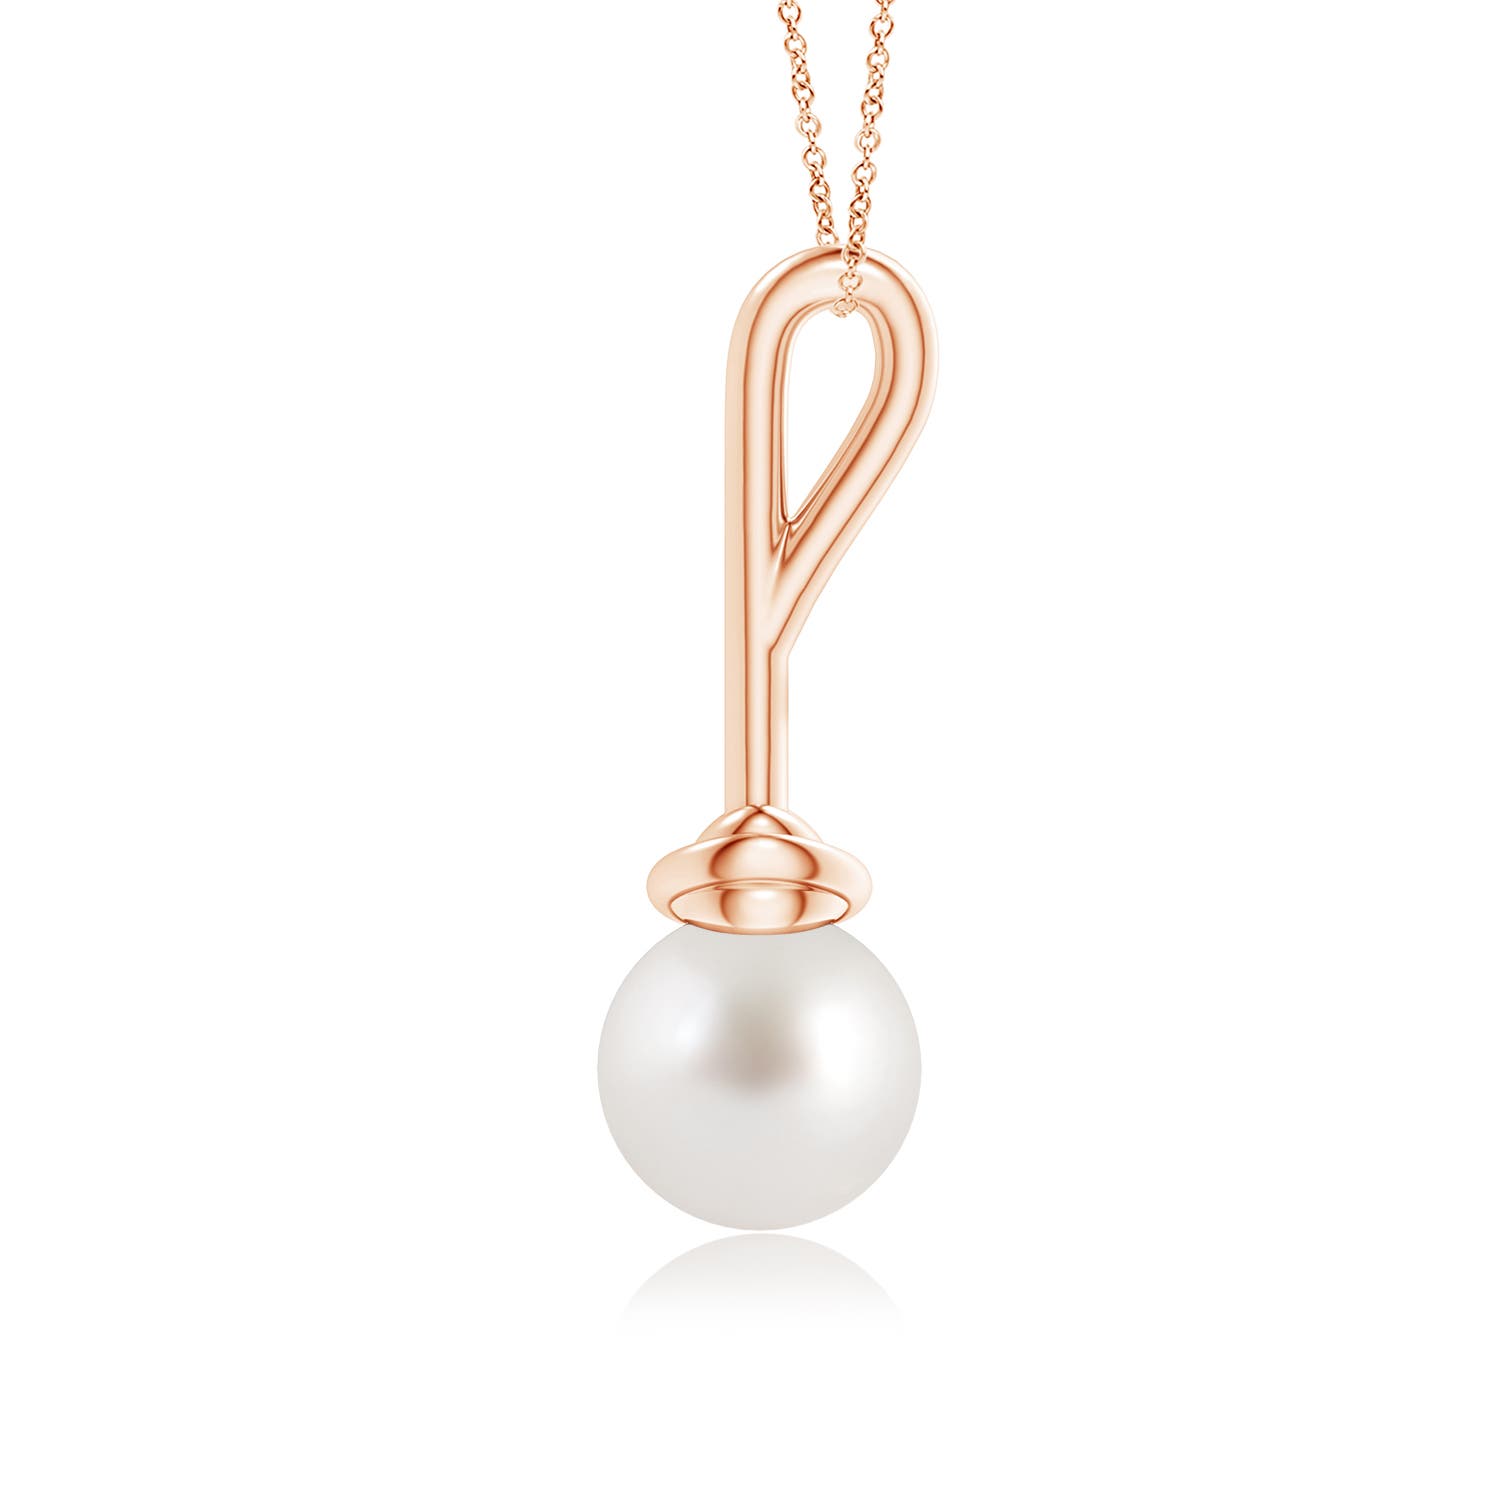 AAA - South Sea Cultured Pearl / 5.25 CT / 14 KT Rose Gold